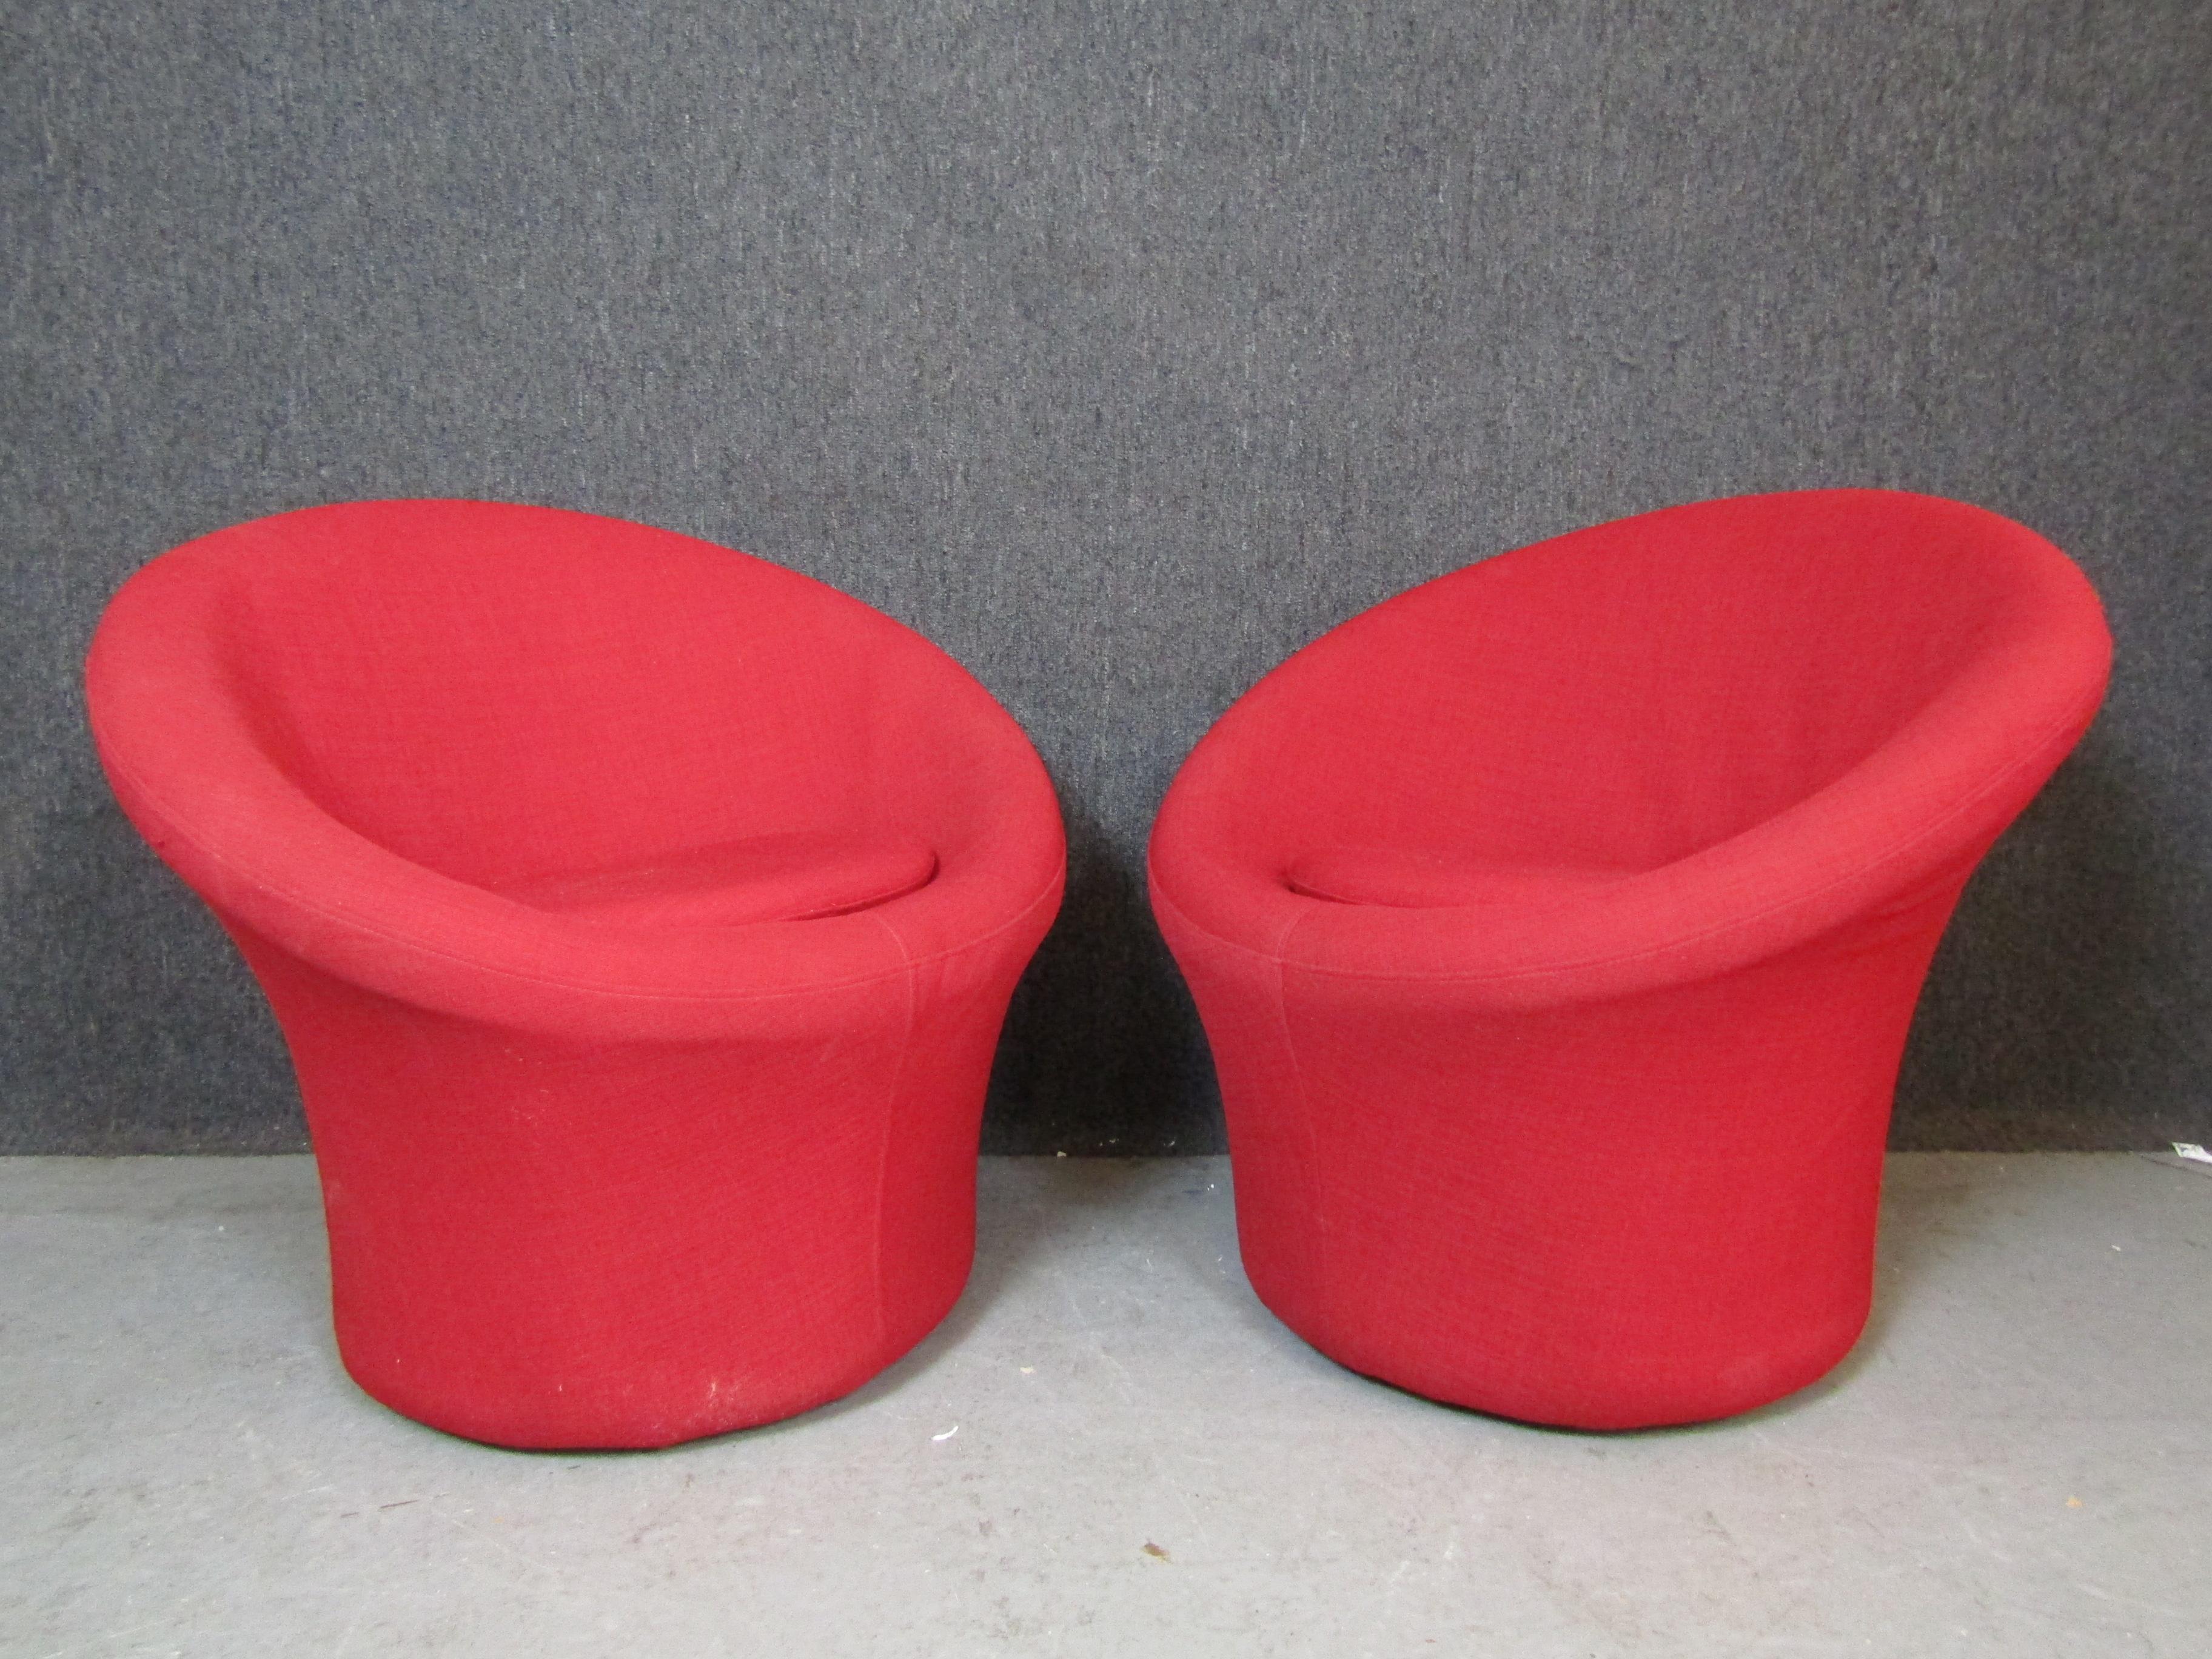 Pair of mid-century modern swivel chairs by Pierre Paulin in bright red fabric. Great soft form with swivel base.
Please confirm location NY or NJ